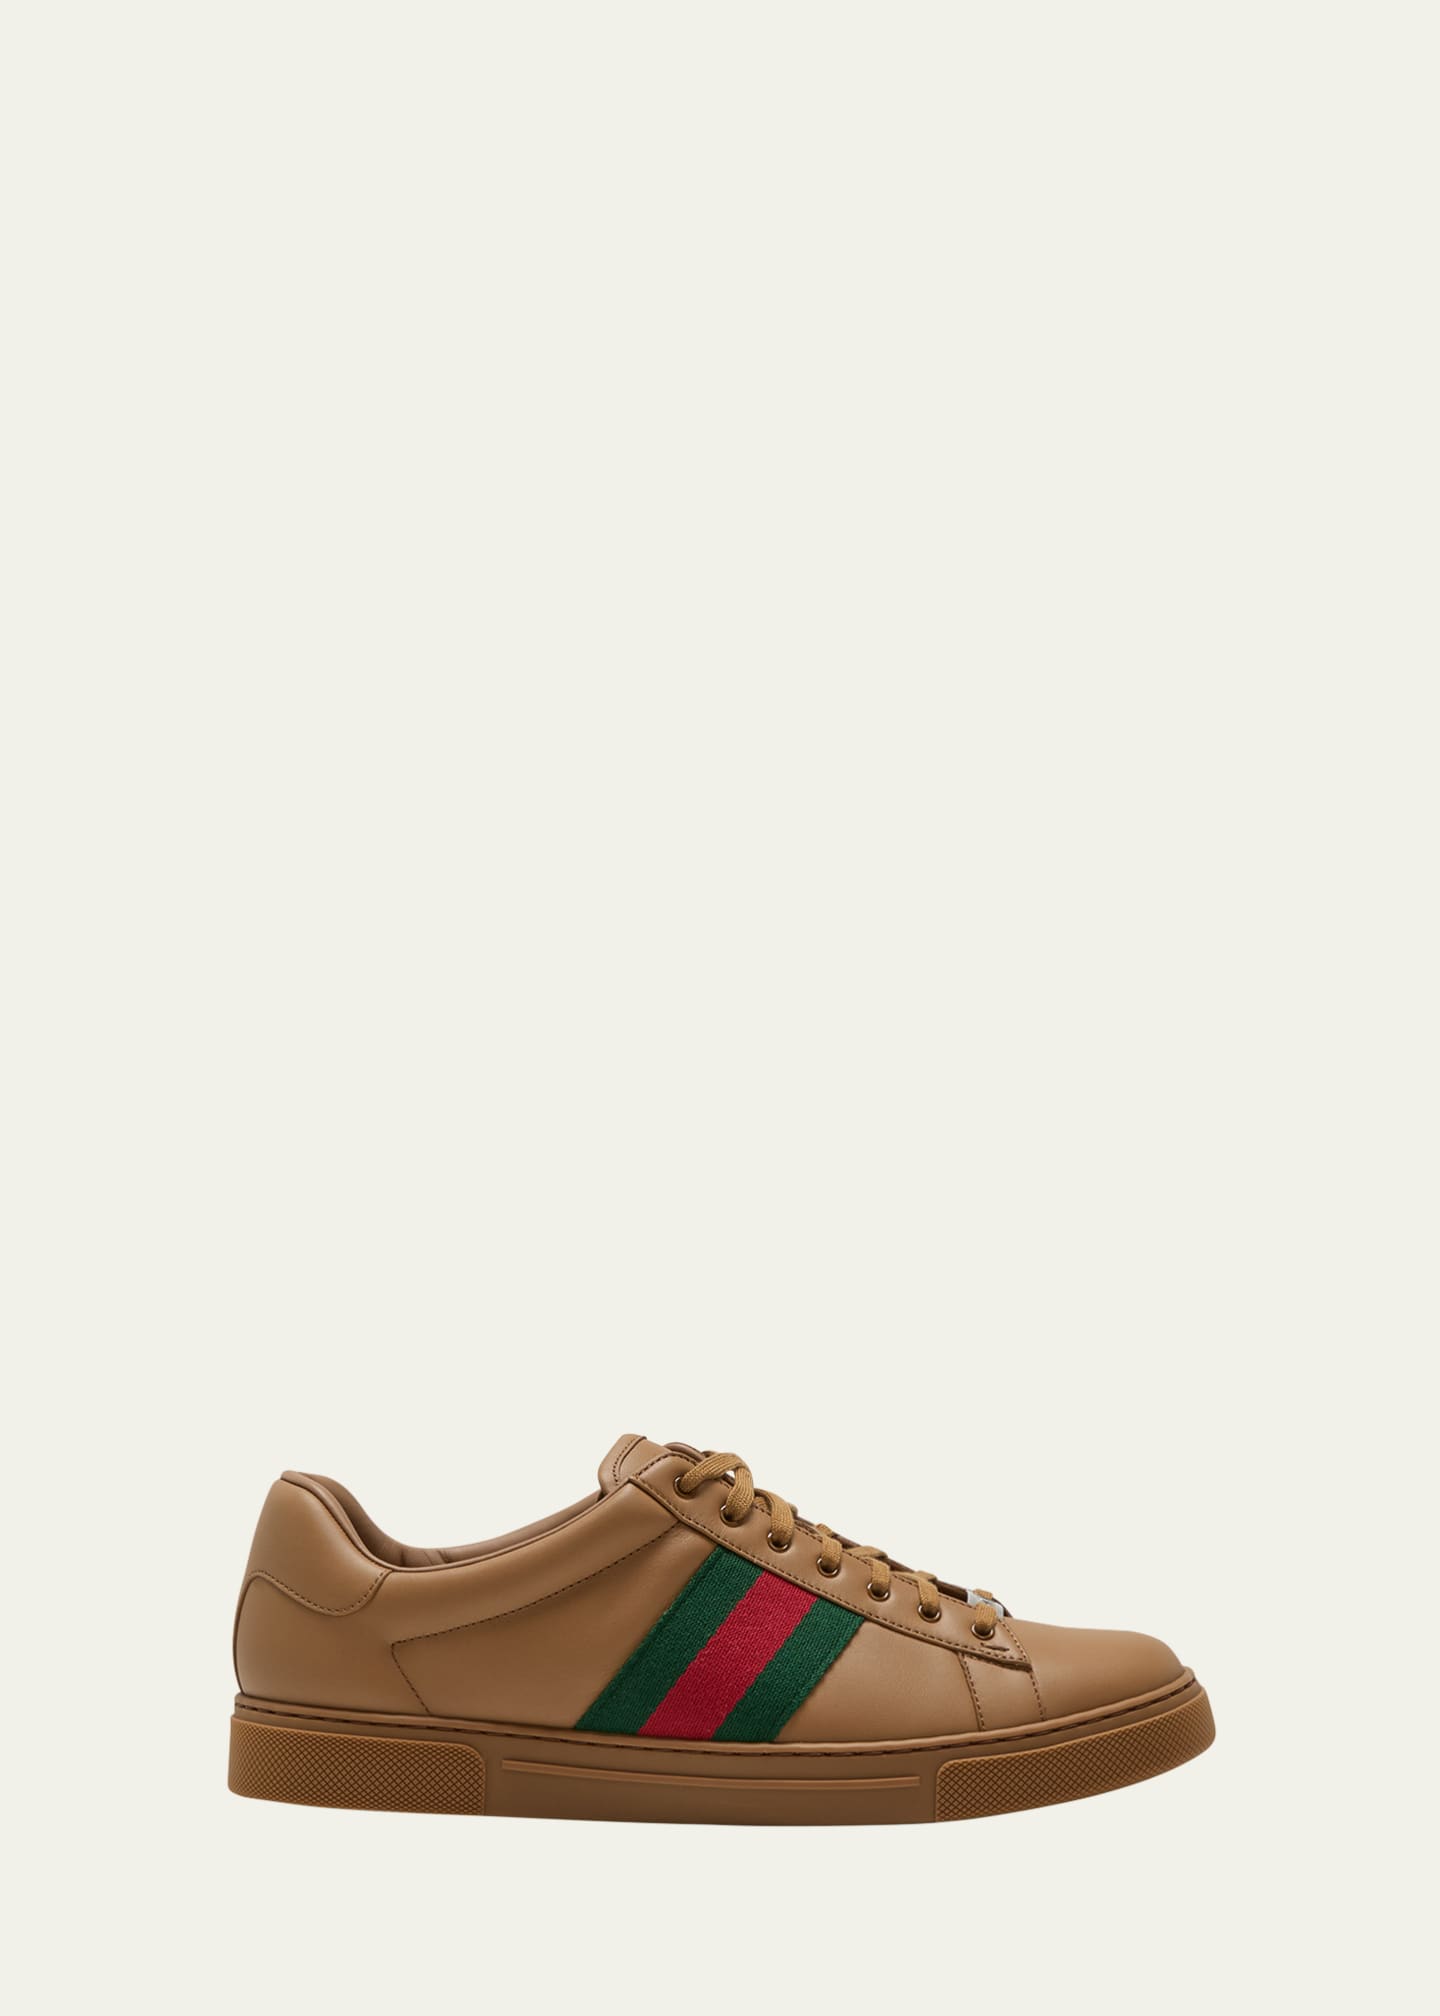 Gucci Men's Ace Leather Low-Top Sneakers with Web - Bergdorf Goodman